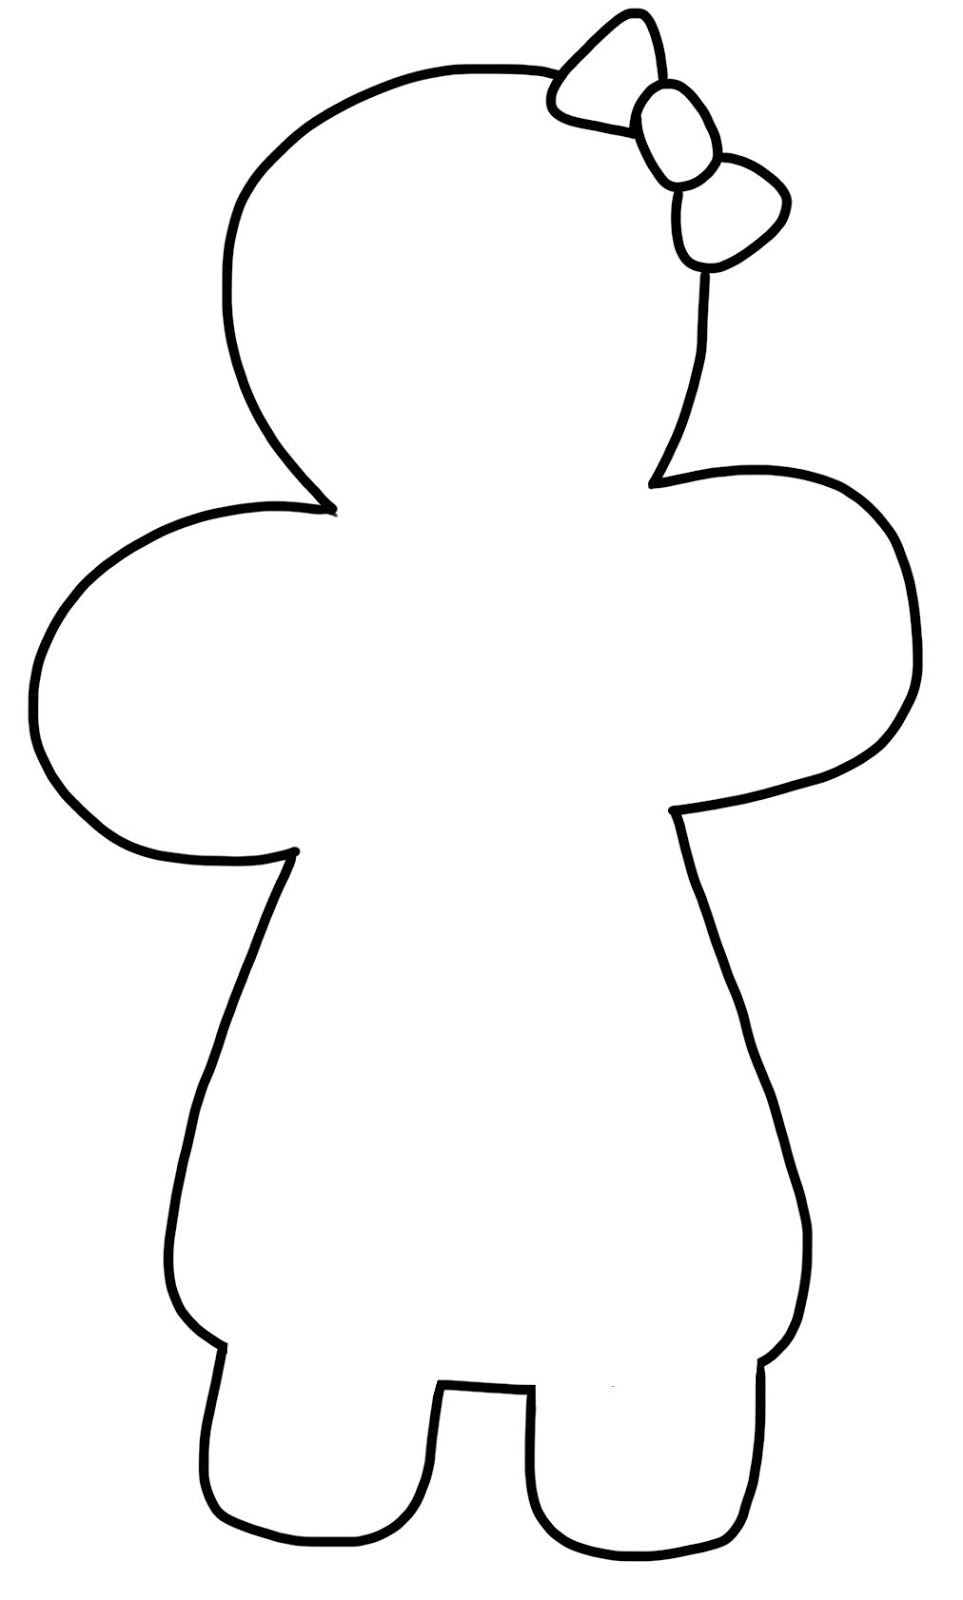 Gingerbread Man Clip Art Free - Clipart library